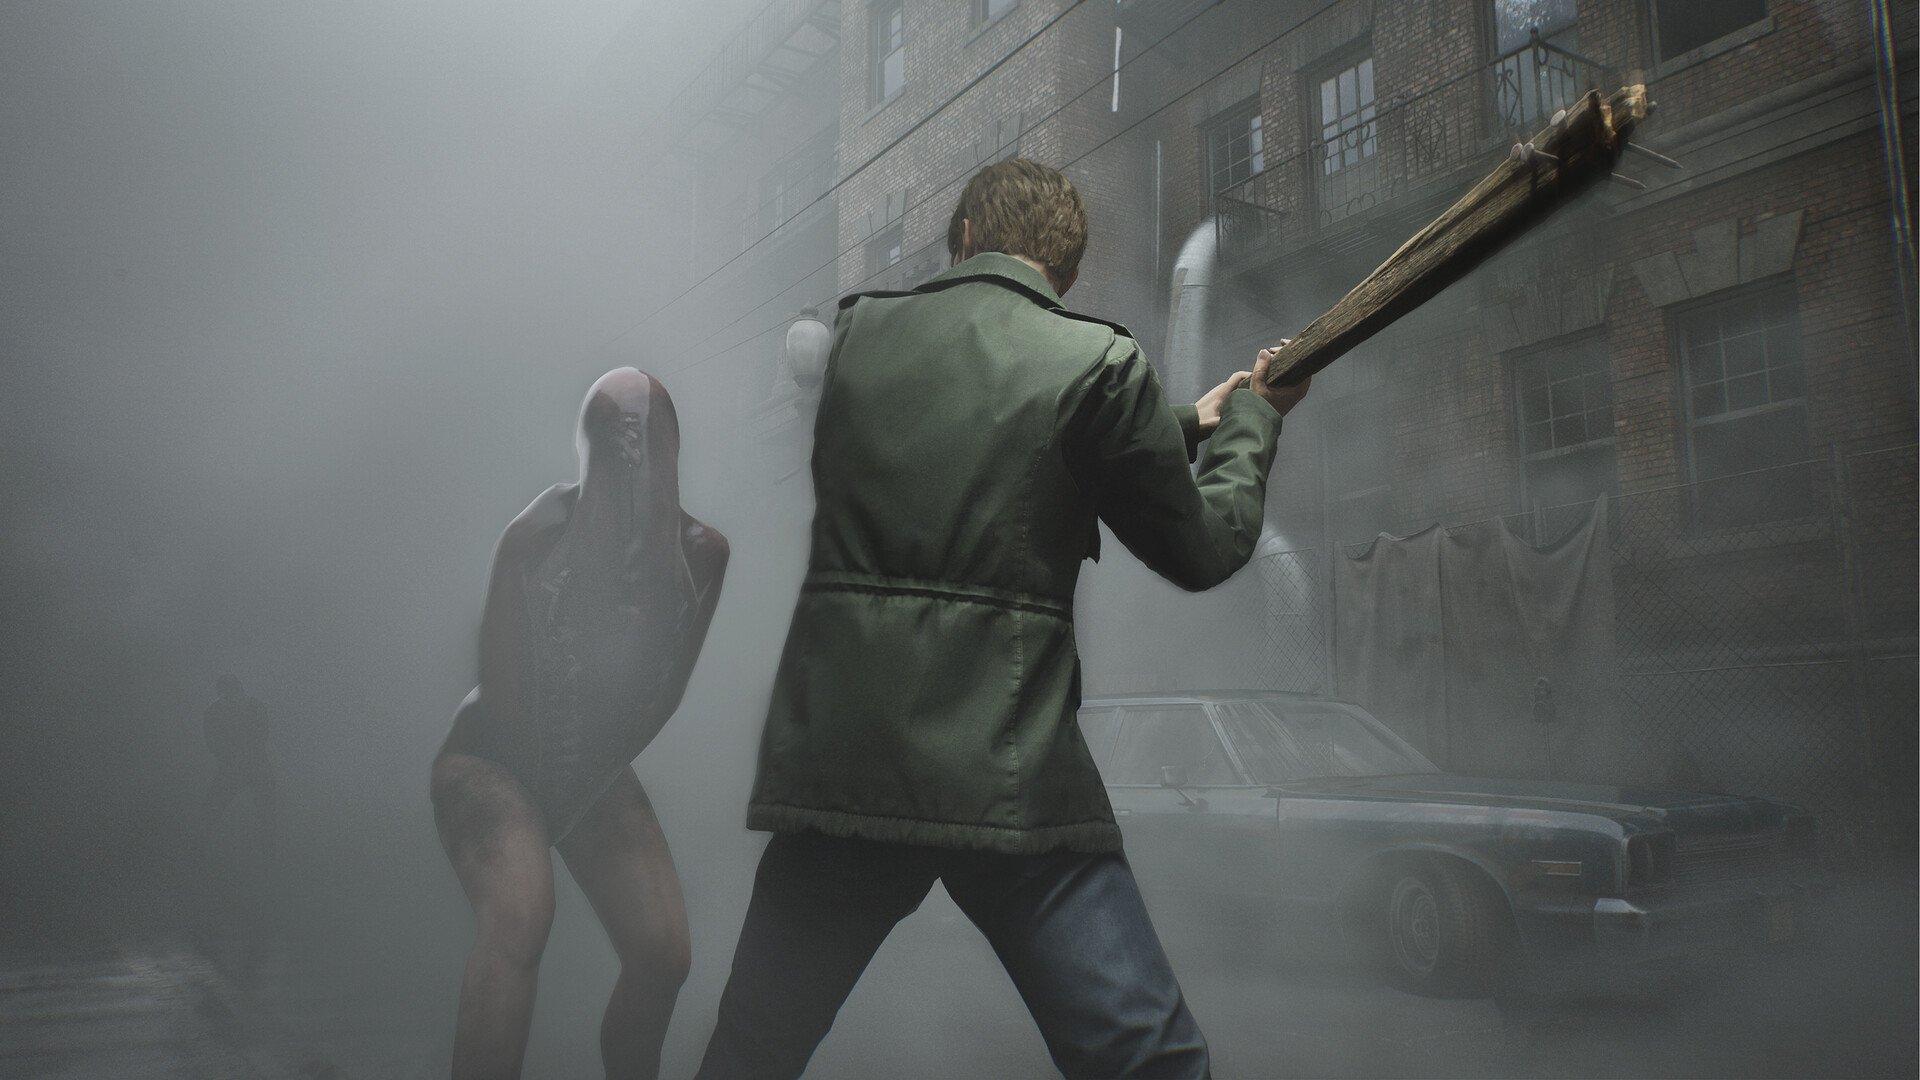 Silent Hill 2 (PS5) is #31 on 's sales chart for video games : r/ silenthill